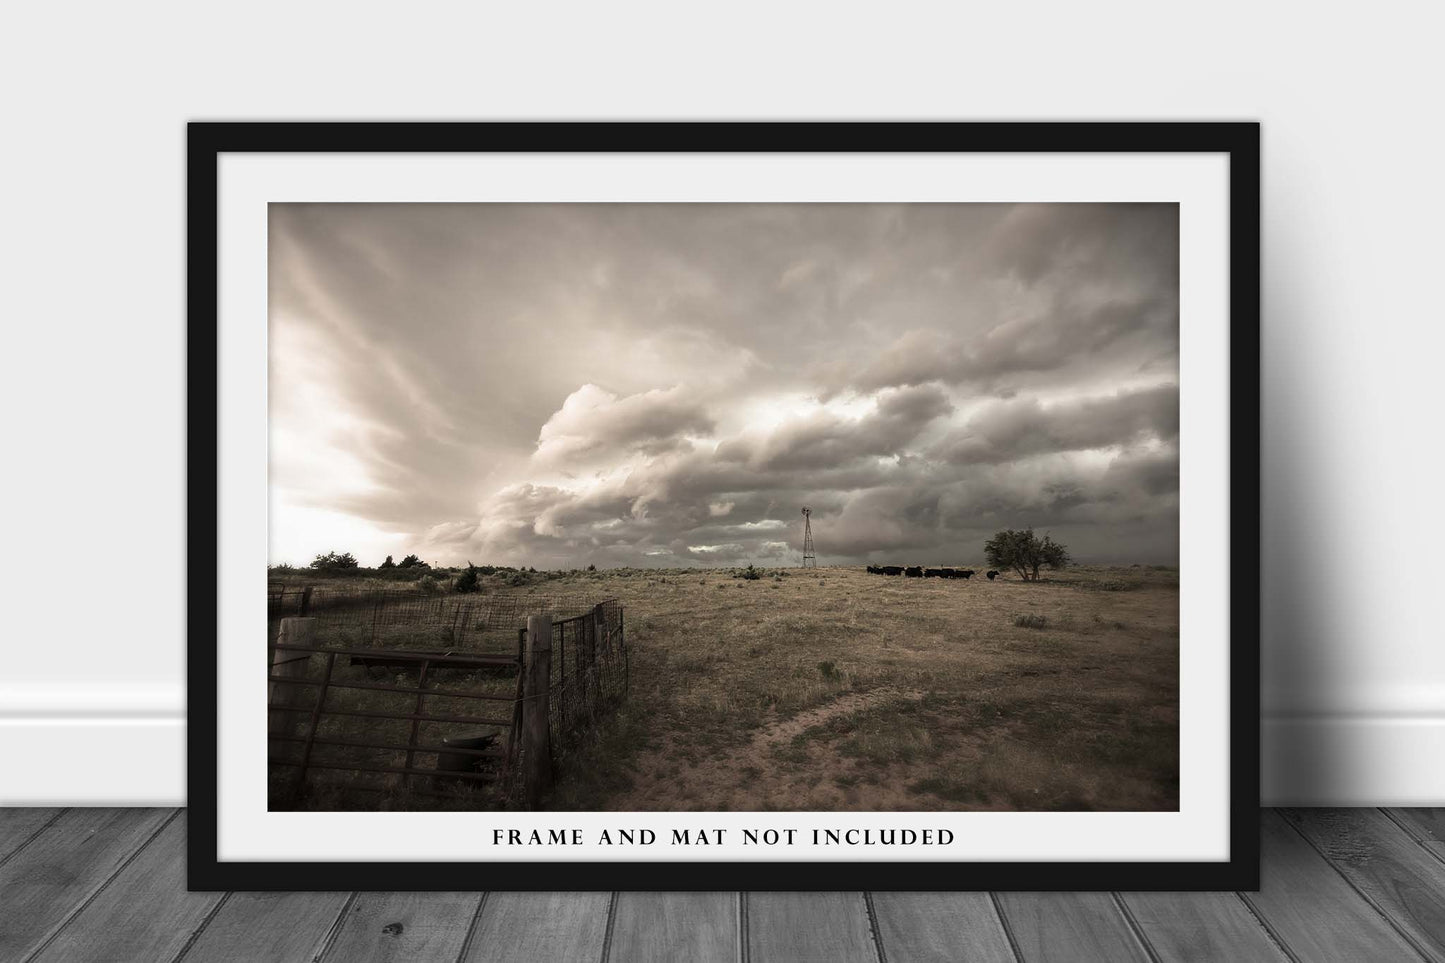 Western Photography Print - Wall Art Picture of Storm Clouds Over Country Landscape on Stormy Day in Oklahoma Windmill Cattle Pen Farm Decor